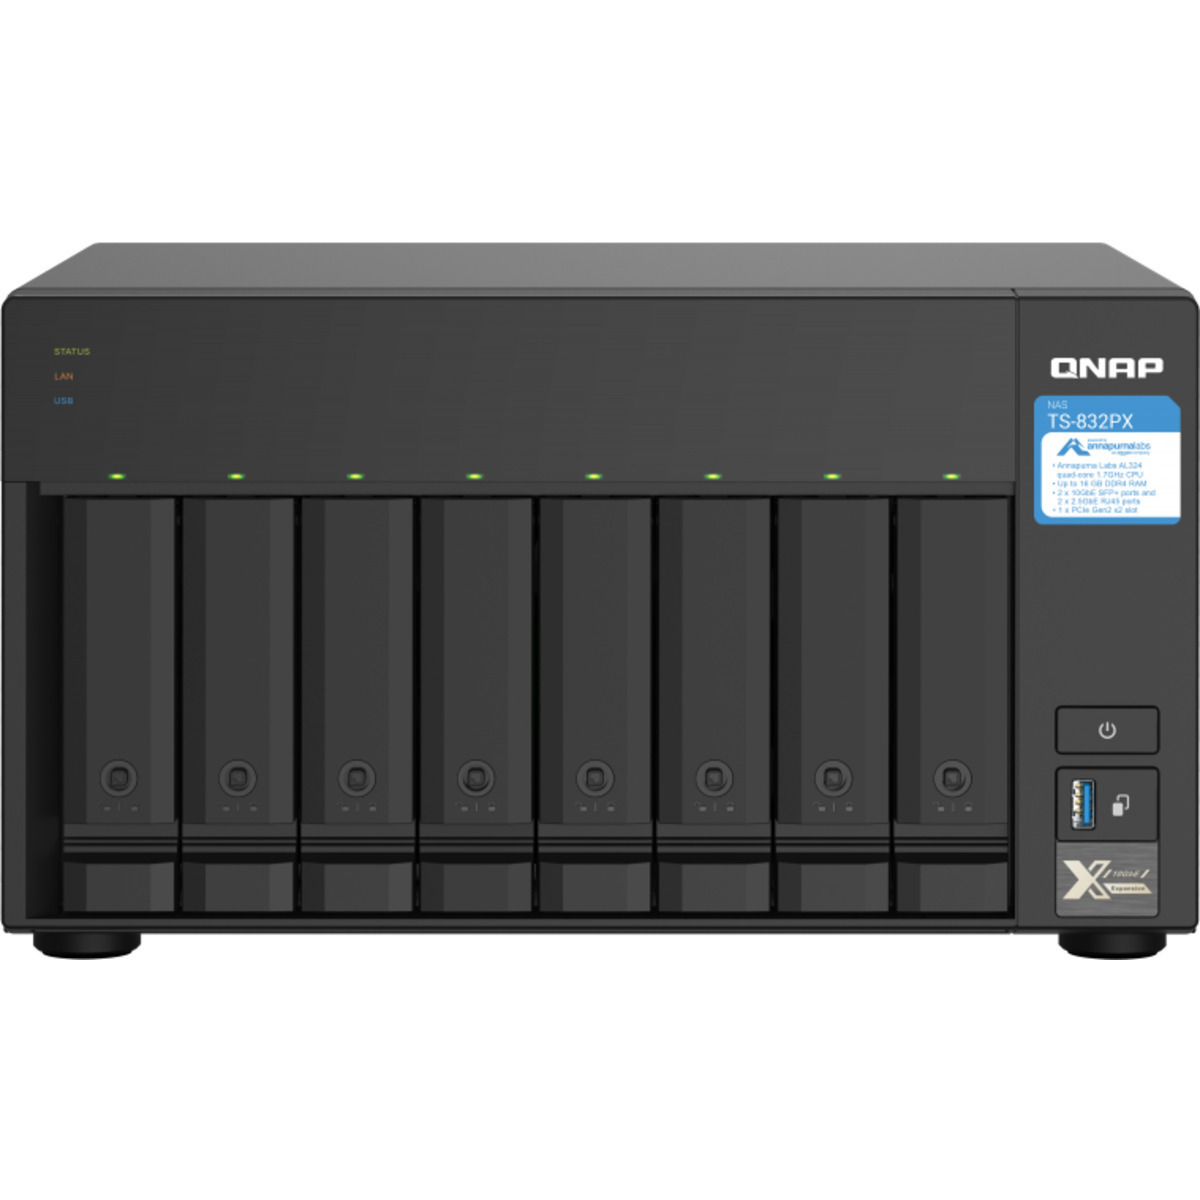 QNAP TS-832PX 4tb 8-Bay Desktop Multimedia / Power User / Business NAS - Network Attached Storage Device 8x500gb Western Digital Red SA500 WDS500G1R0A 2.5 560/530MB/s SATA 6Gb/s SSD NAS Class Drives Installed - Burn-In Tested - FREE RAM UPGRADE TS-832PX